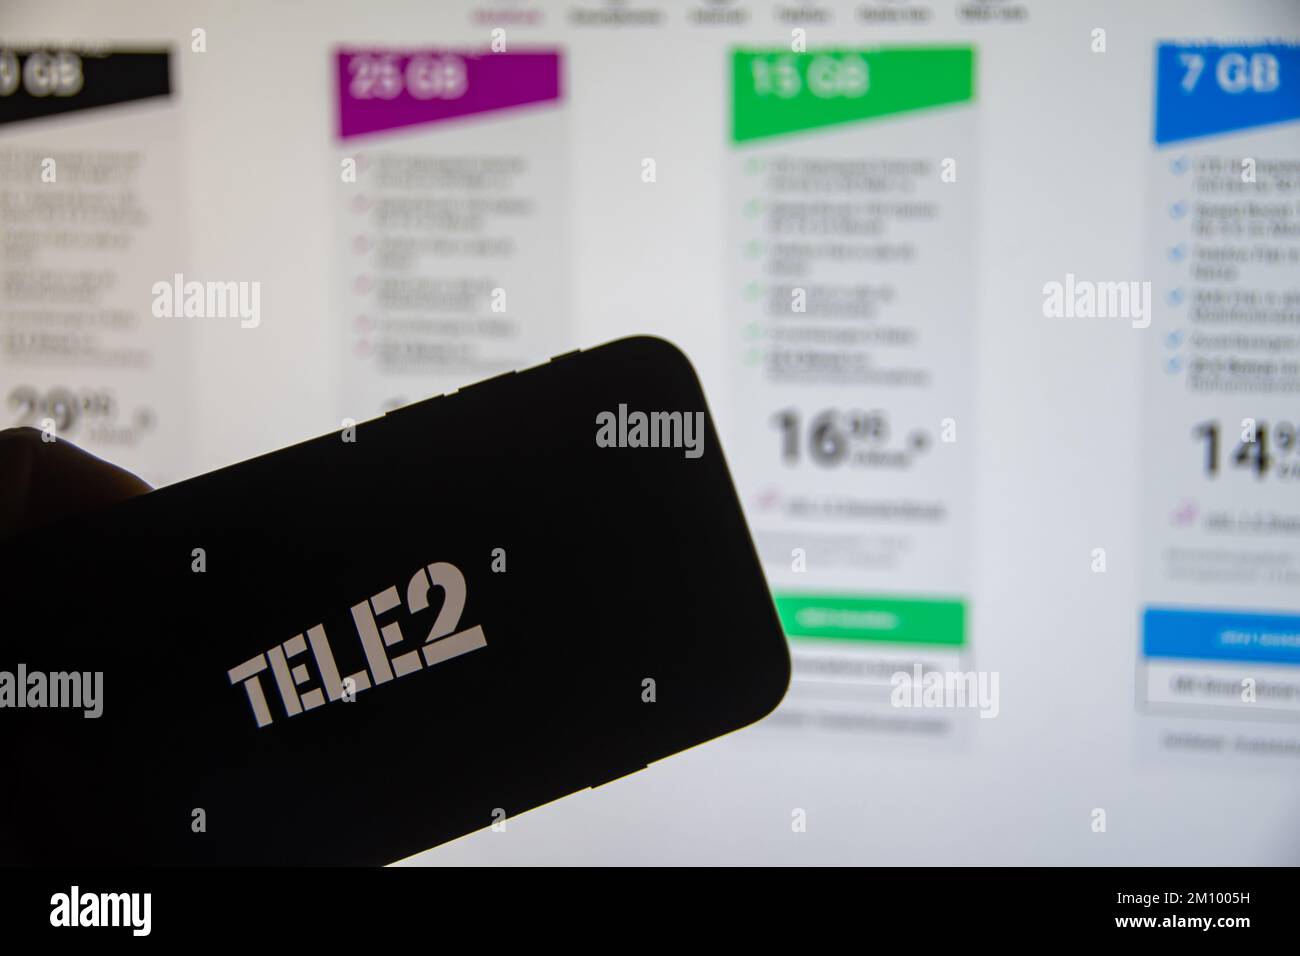 Rheinbach, Germany  8 December 2022, The brand logo of the Swedish telecommunications company 'Tele 2' on the display of a smartphone Stock Photo